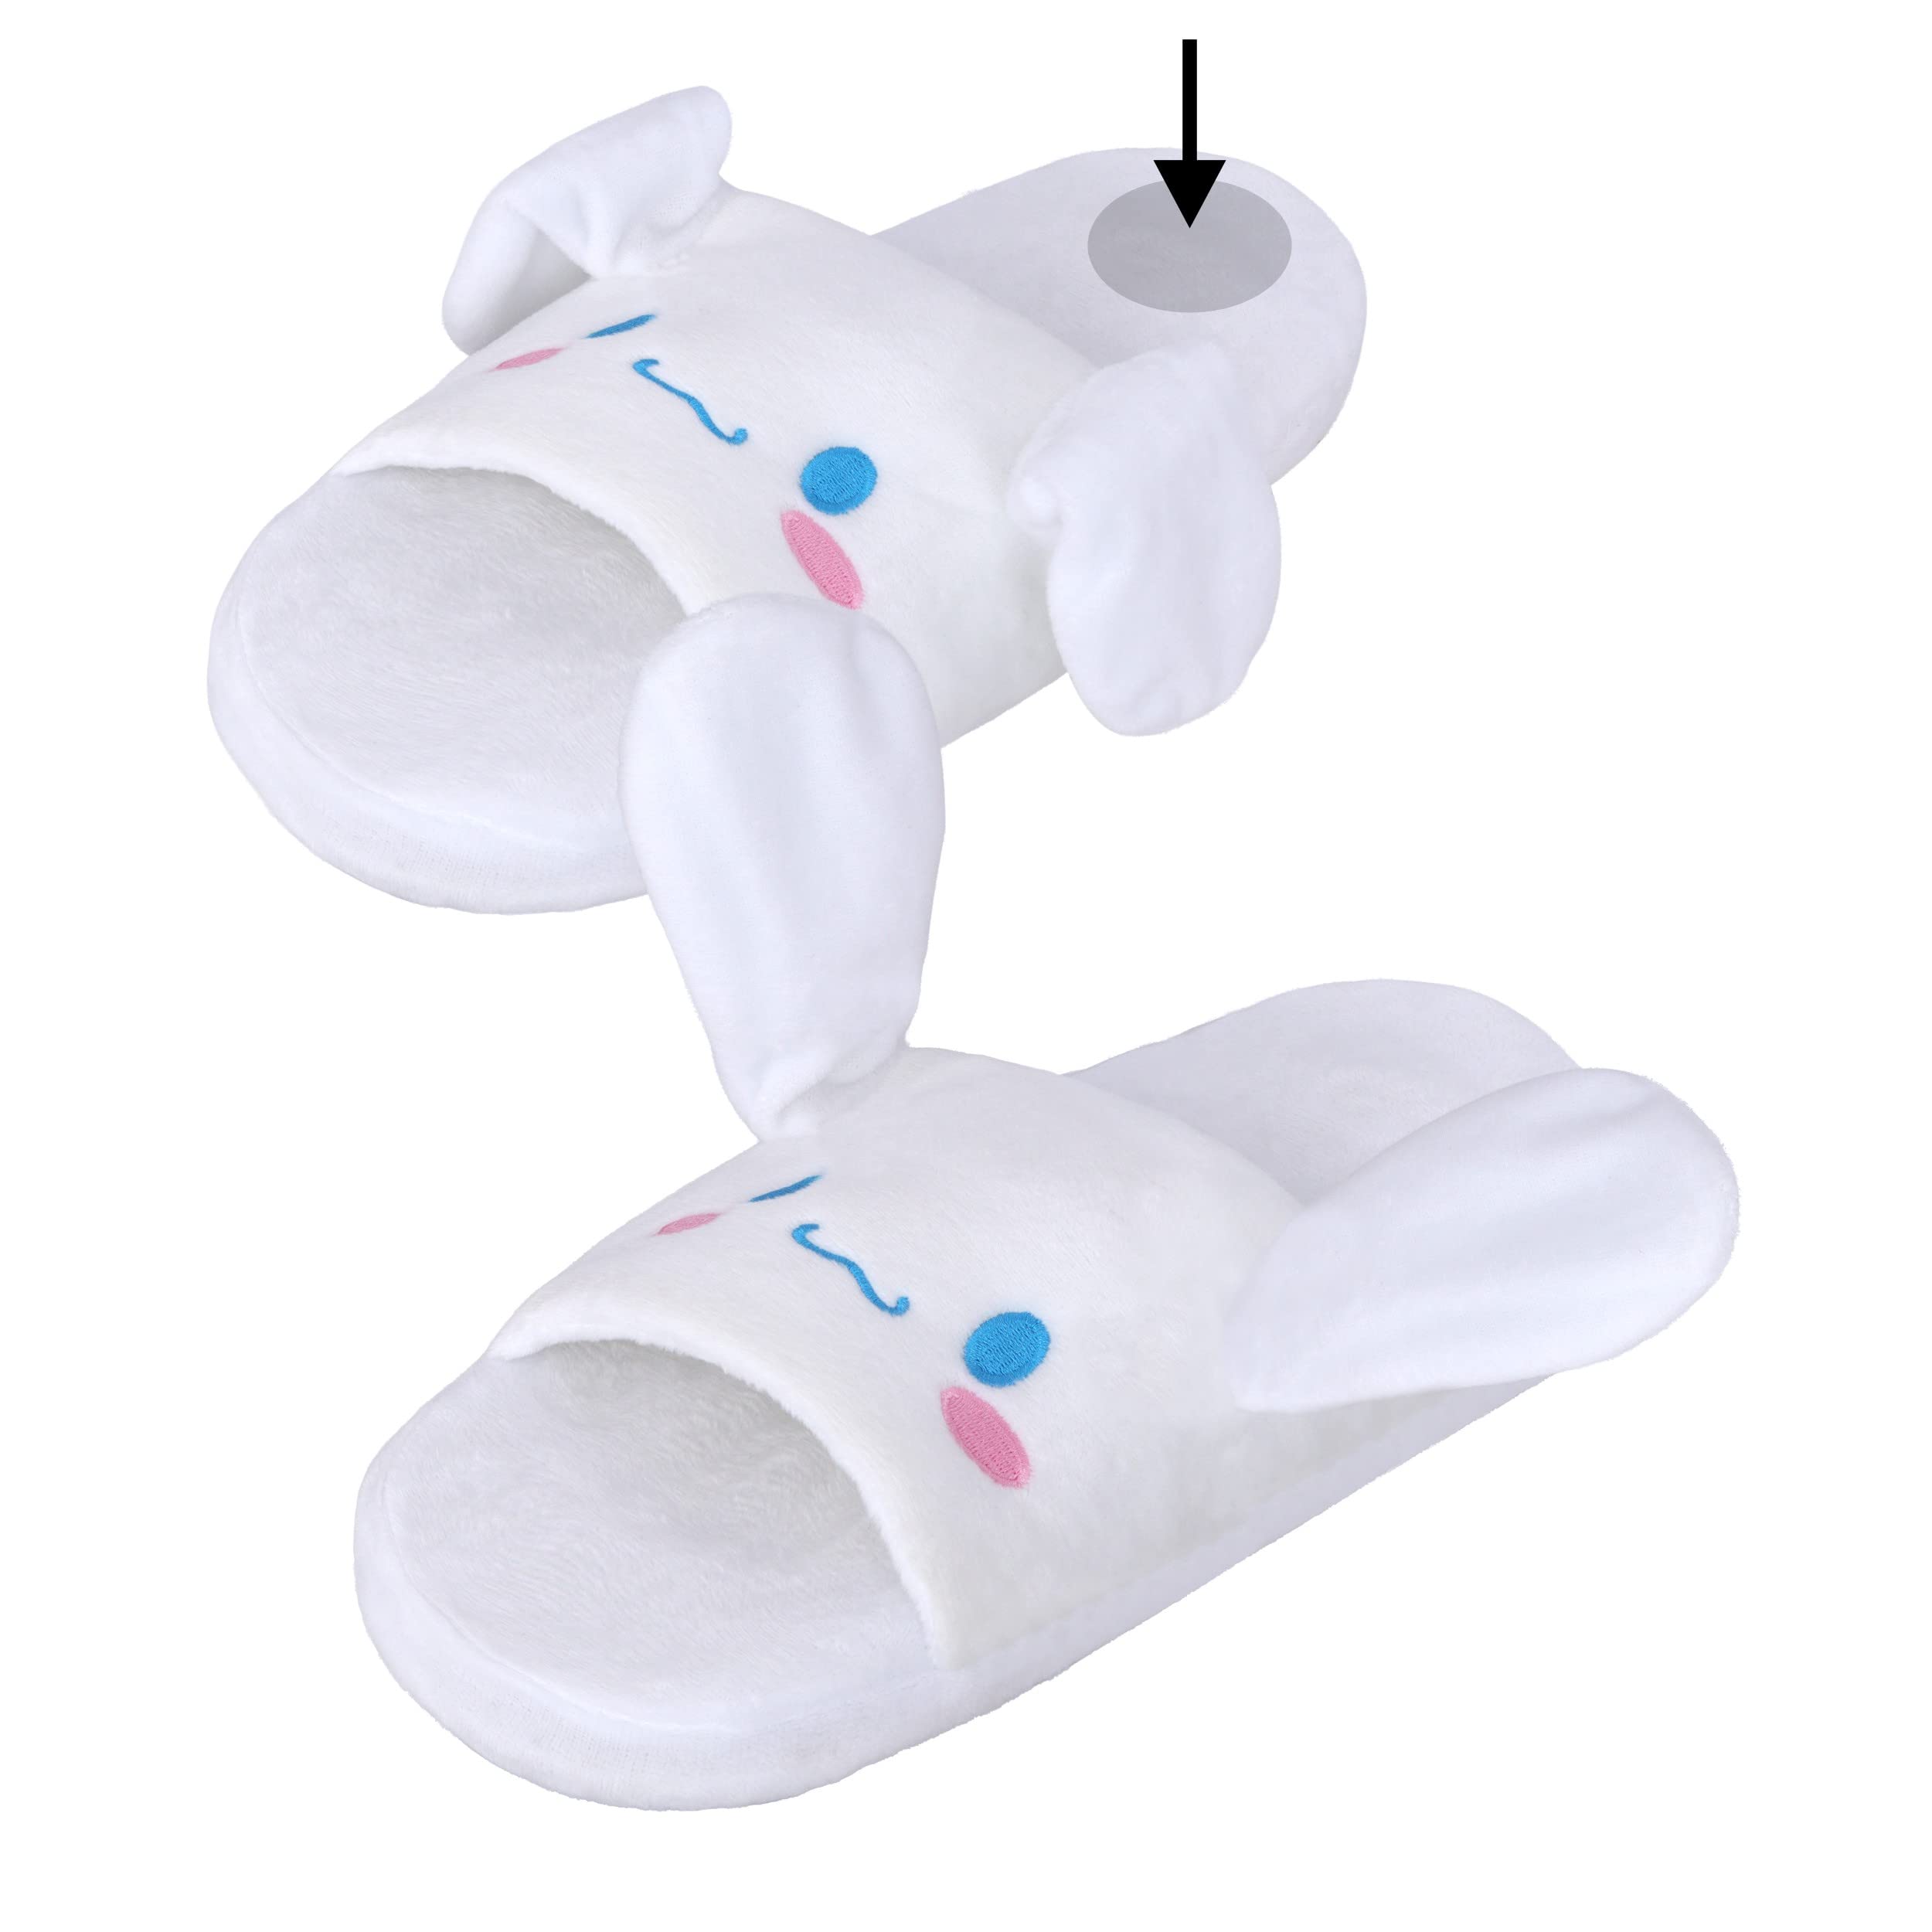 Roffatide Anime Cinnamoroll Fuzzy Slippers White Dog House Slippers Open Toe Open Back FoamEar Moving Jumping Slippers with Rubber Sole for Women Man One Size